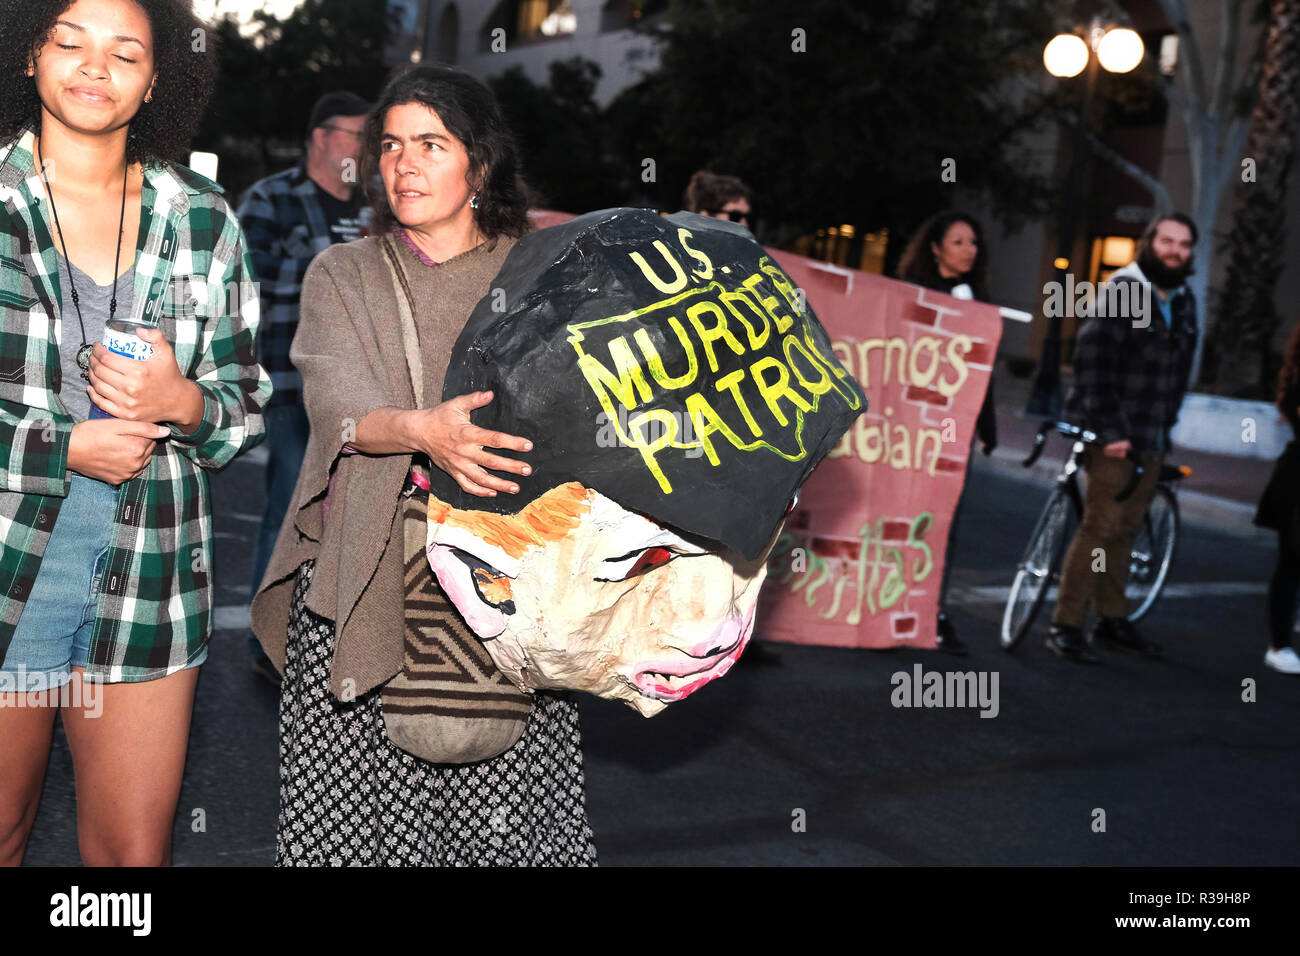 Tucson, Arizona, USA. 21st Nov, 2018. Protesters turn out onto the street of Tucson after the not guilty verdict in the 2012 shooting of Mexican teen Jose Antonio Elena Rodriguez. Border Patrol agent Lonnie Swartz shot the teen 16 times through the border fence in Nogales after the boy was allegedly throwing rocks at agents. Instead of retreating for cover like other agents Swartz chose to use deadly force and kill the fleeing Rodriguez . This was the the second trial of Swartz and the aquittal on involuntary manslaughter charges followed a not guilty verdict on federal charges last year Stock Photo